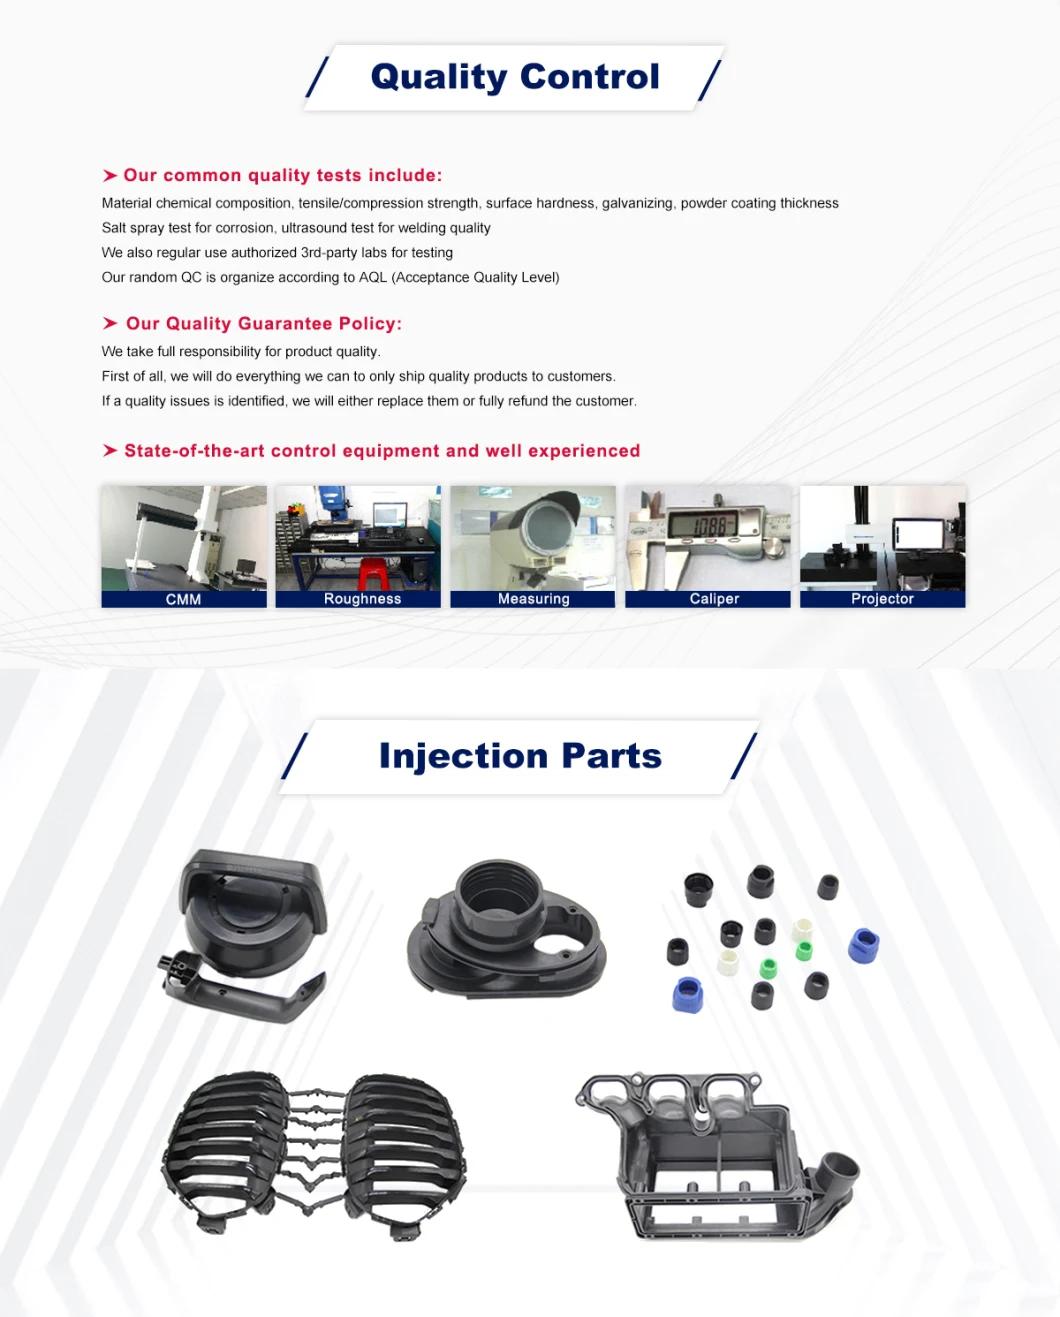 Injection Mould Design Fundamentals Parts Made by Injection Molding